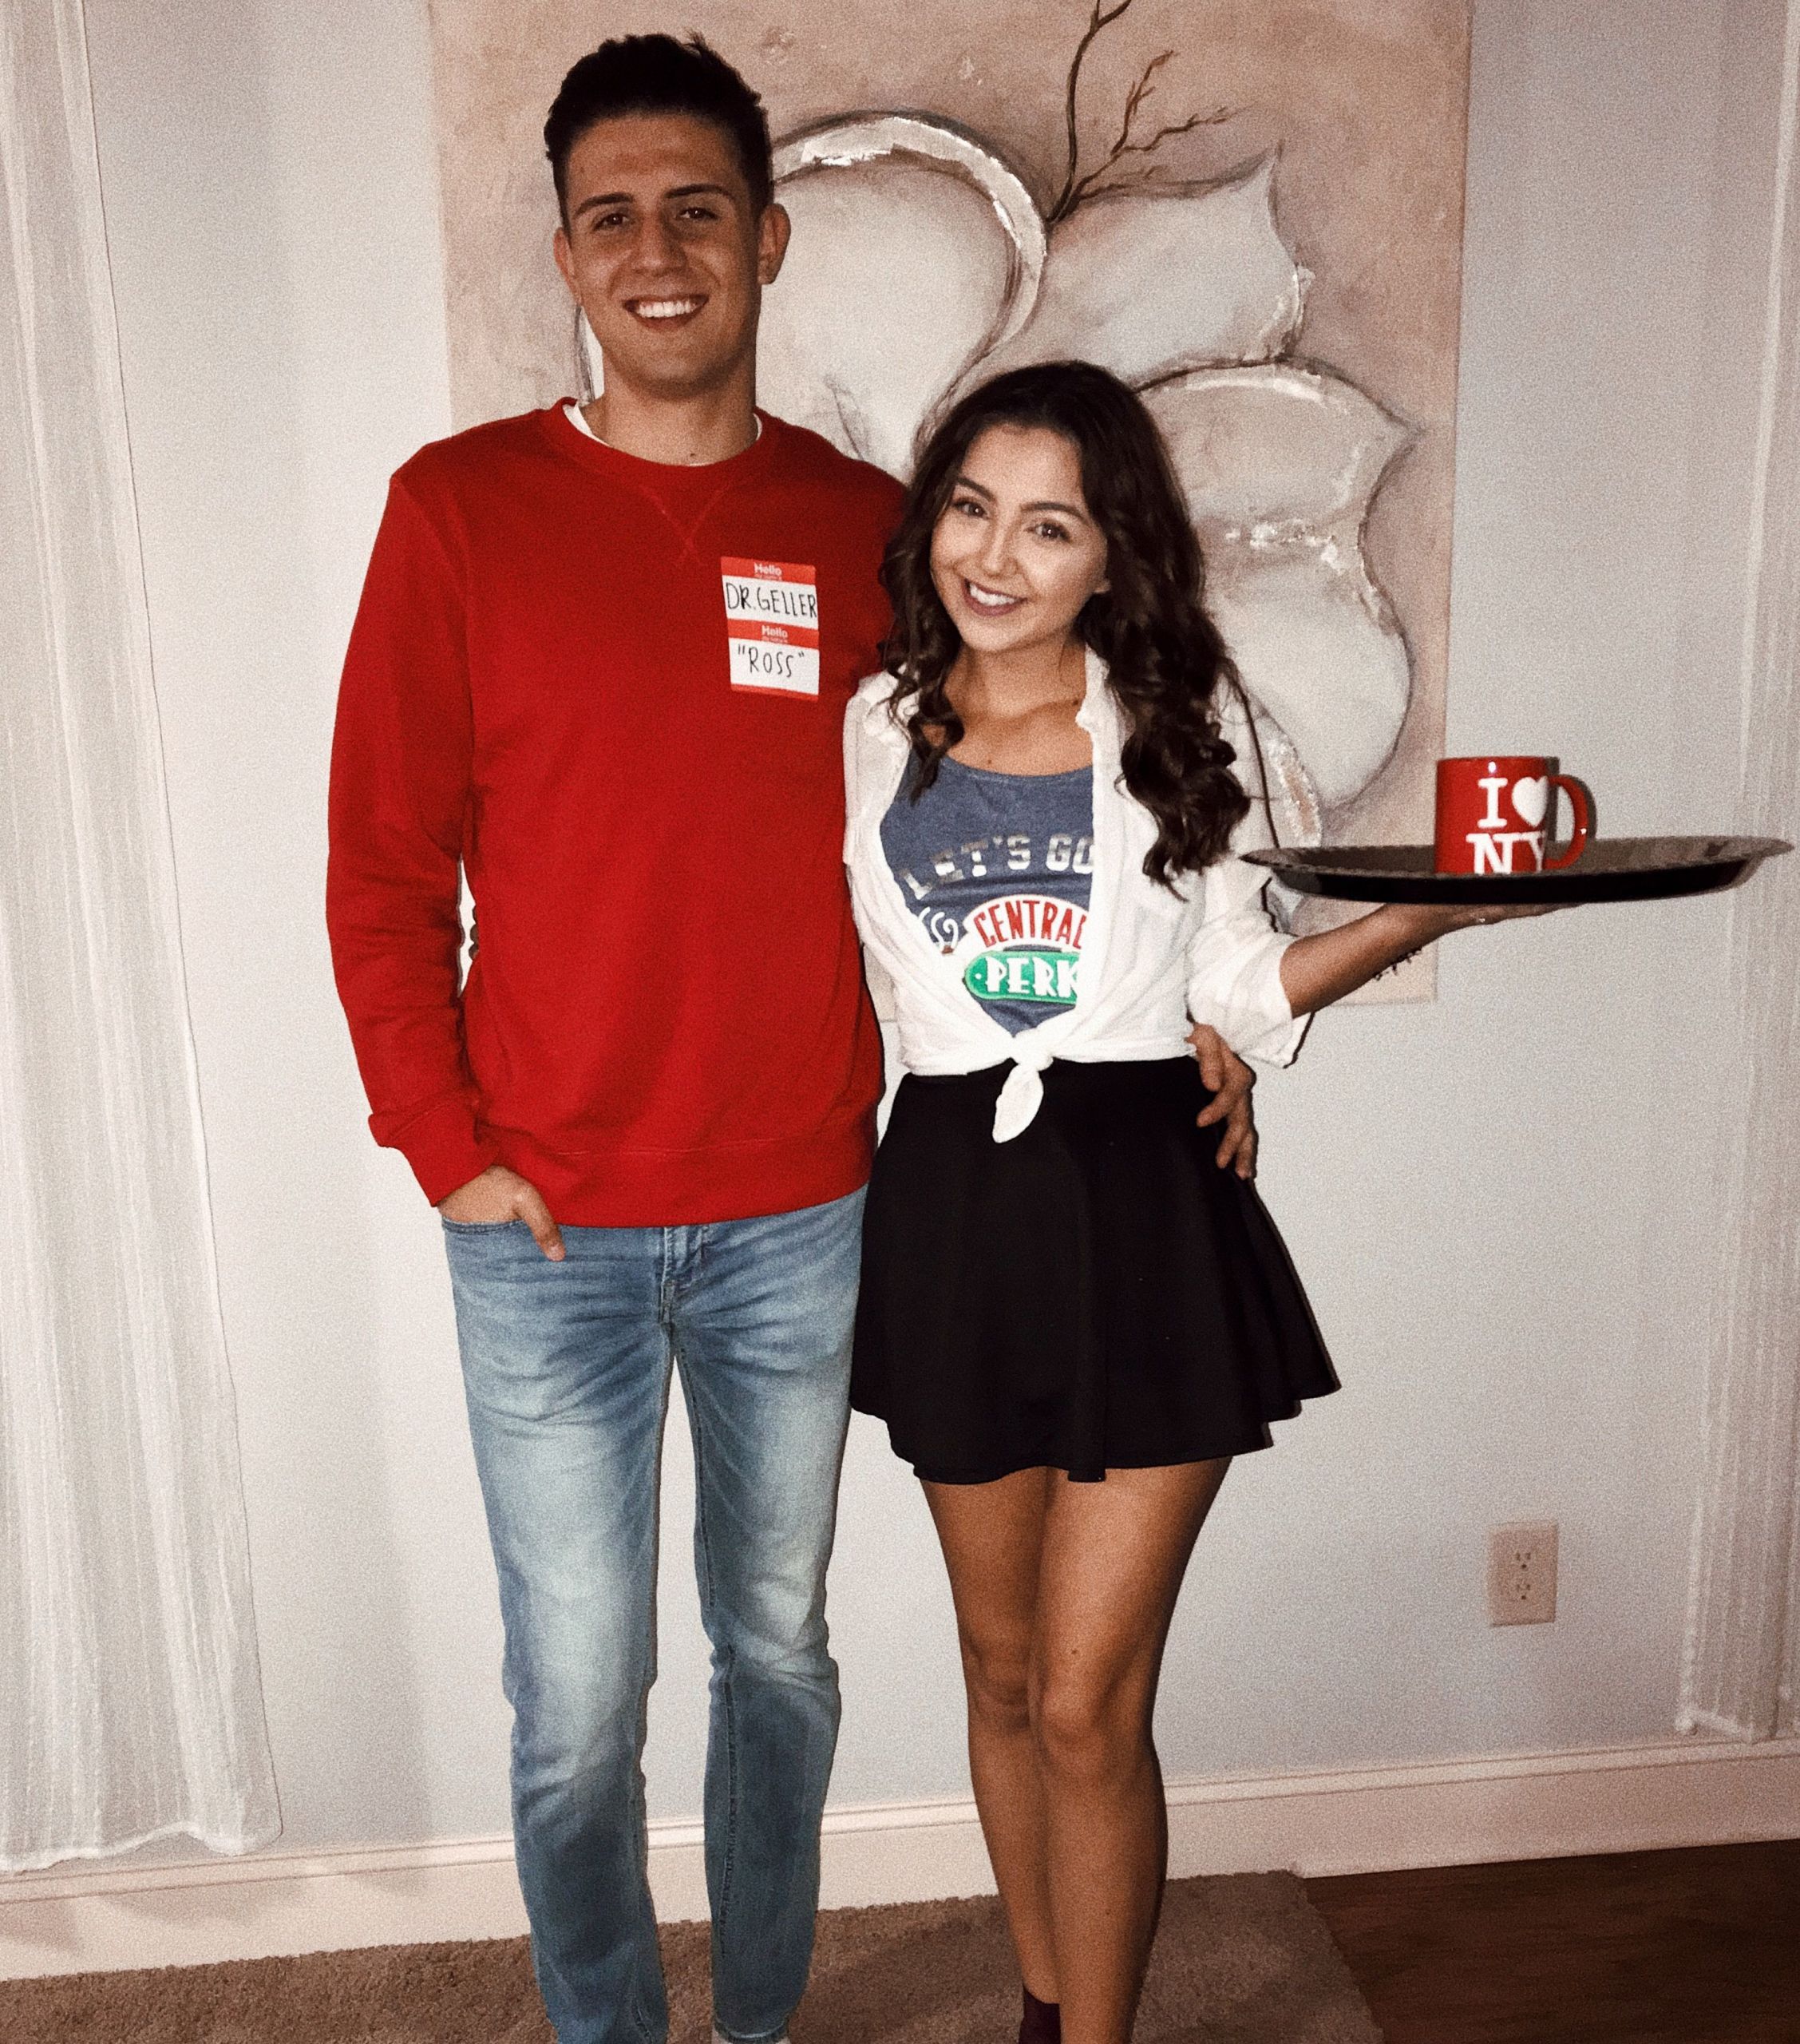 Halloween 2020 Costumes Ideas
 Rachel and Ross from Friends costume in 2019